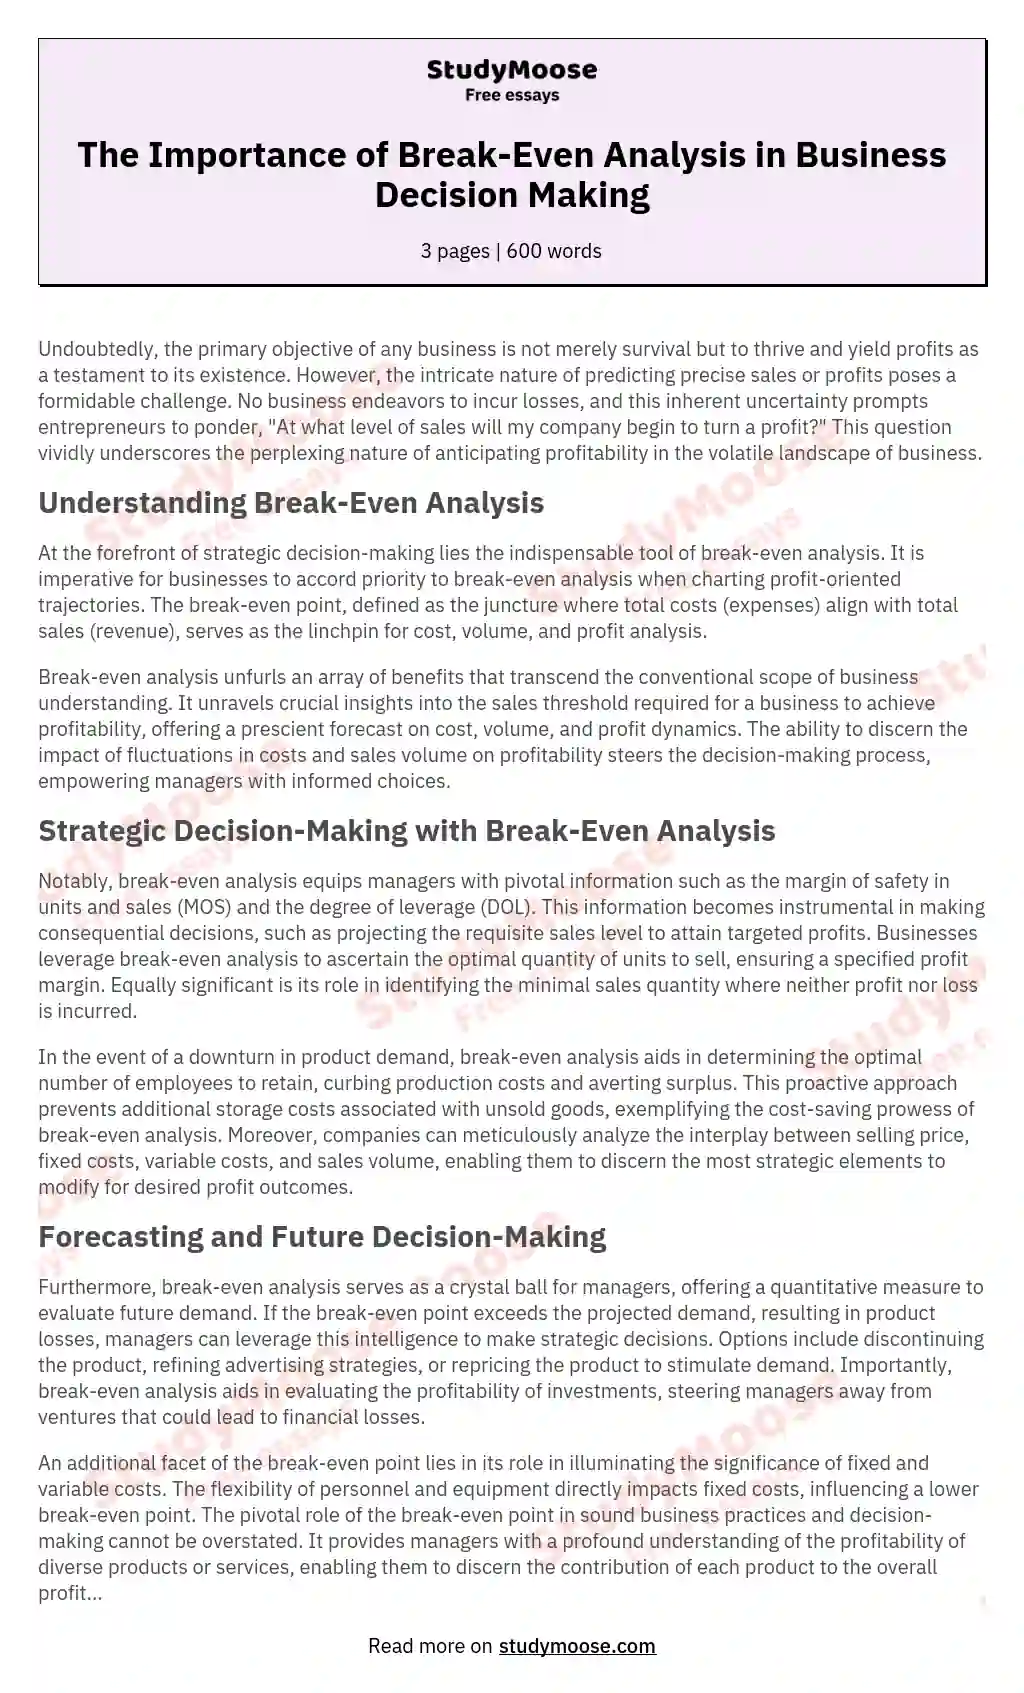 The Importance of Break-Even Analysis in Business Decision Making essay